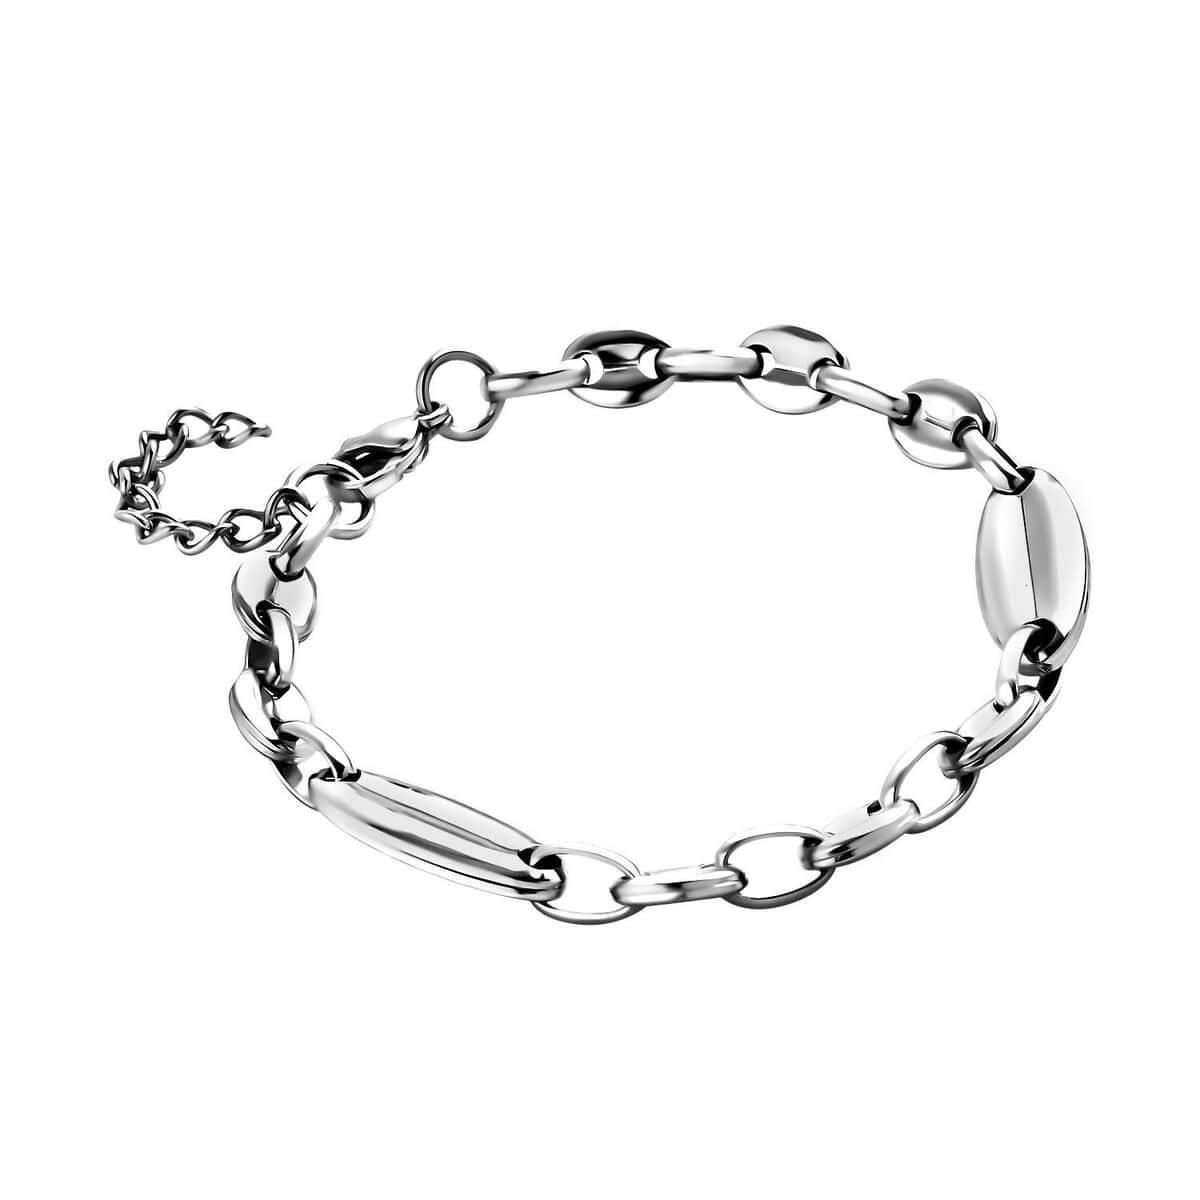 Doorbuster Pig Nose Chain Bracelet in Stainless Steel (8-9.50In) image number 2